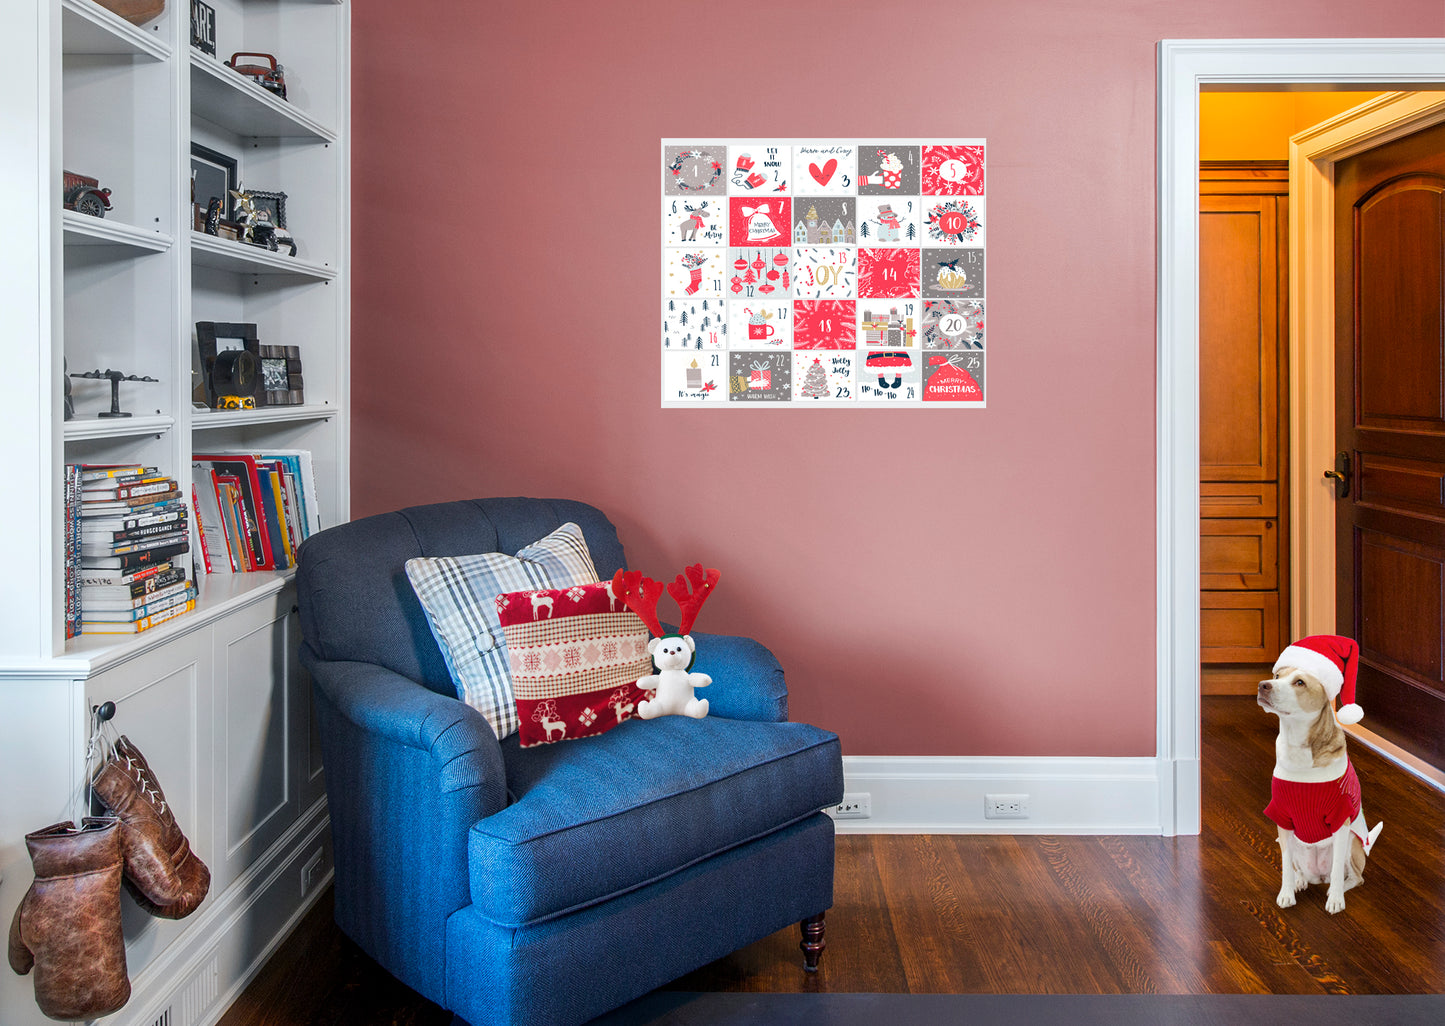 Christmas:  Warm and Cozy Calendar Dry Erase        -   Removable     Adhesive Decal